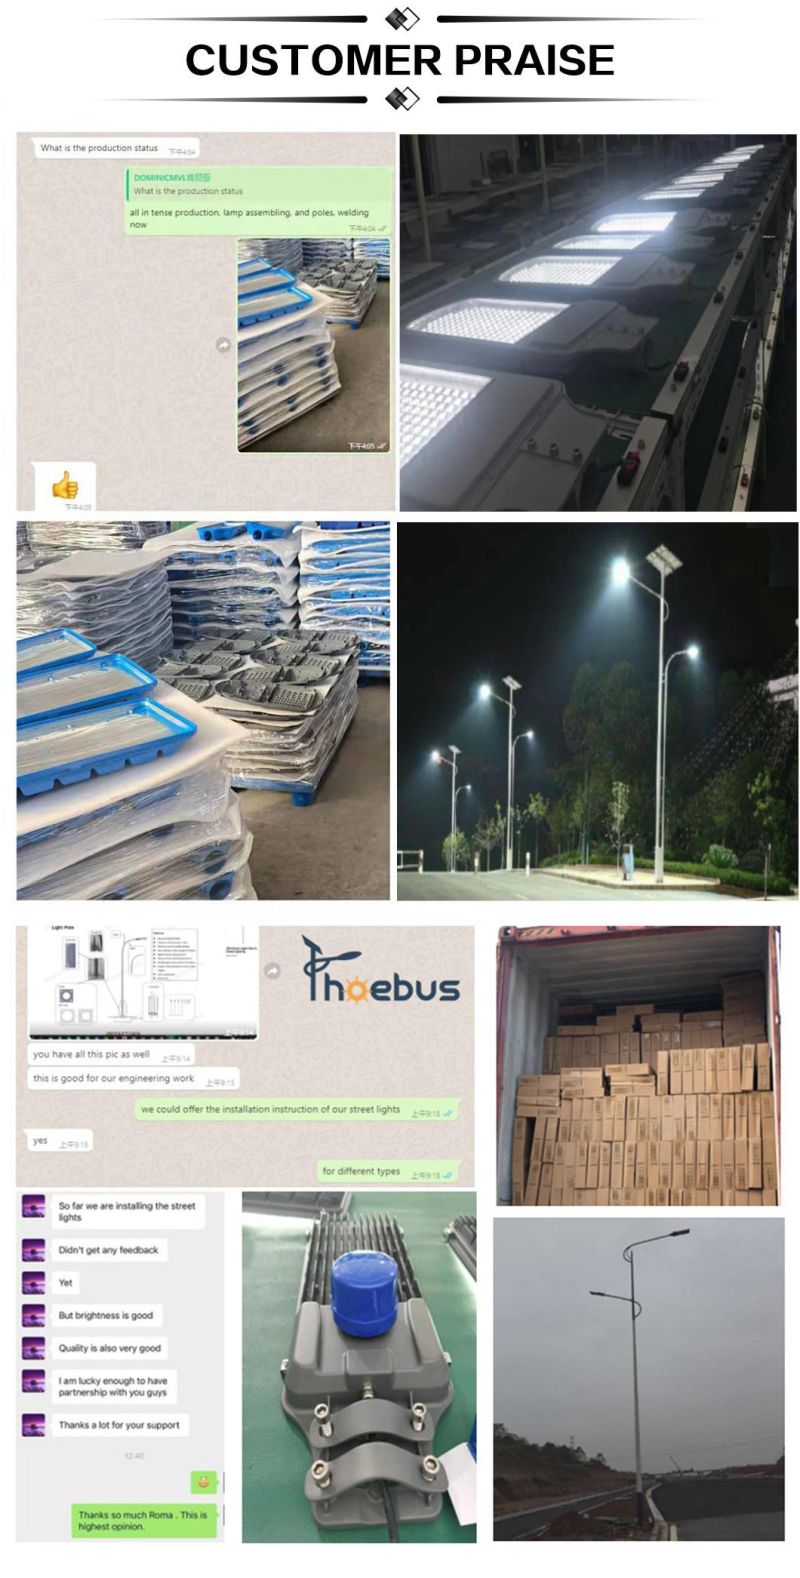 The Most Popular LED Street Light 60W Outdoor LED Lamp IP66